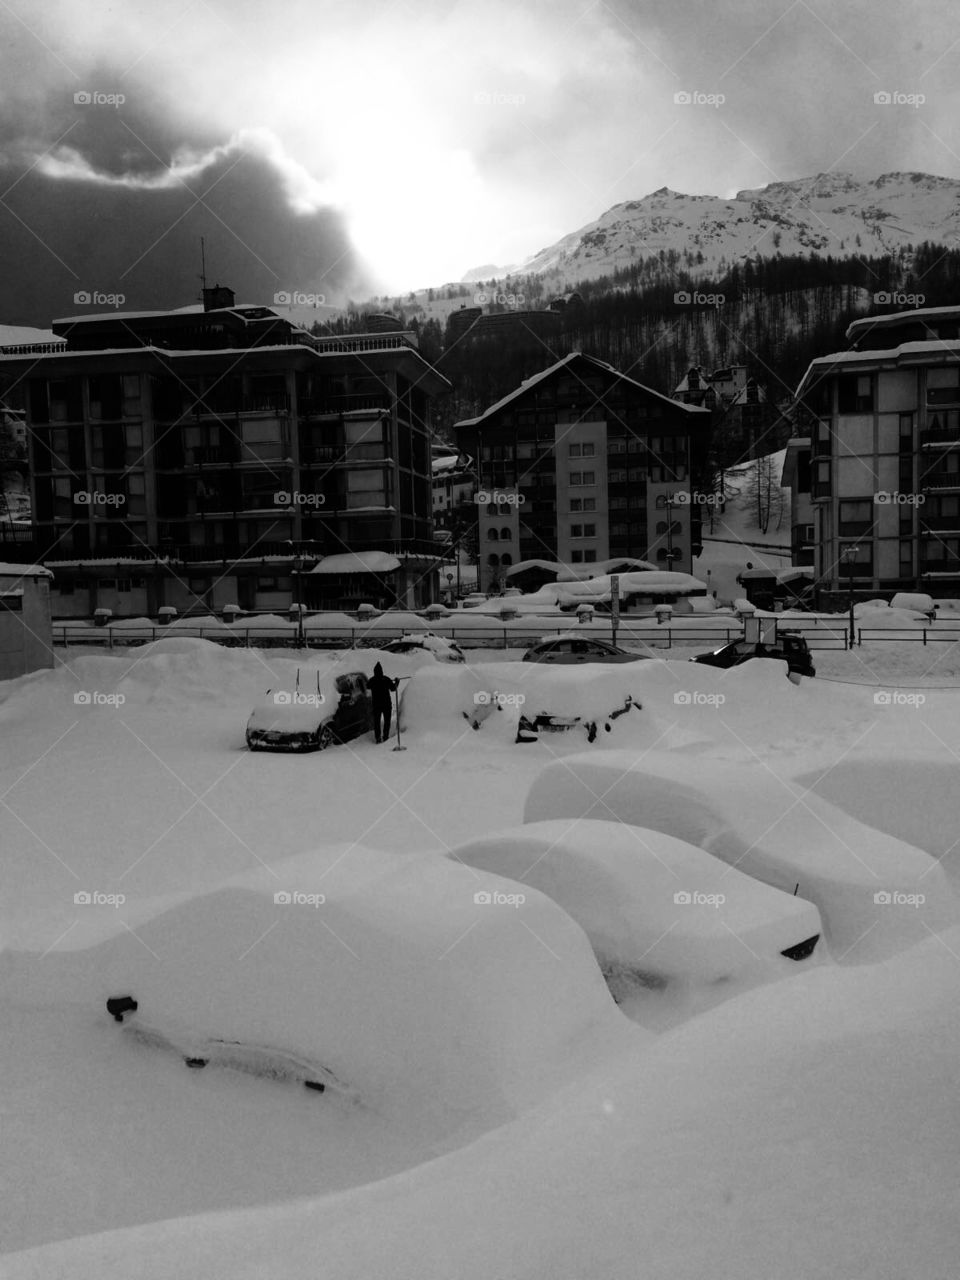 An Italian village in the alps covered in snow and cars / Black and White